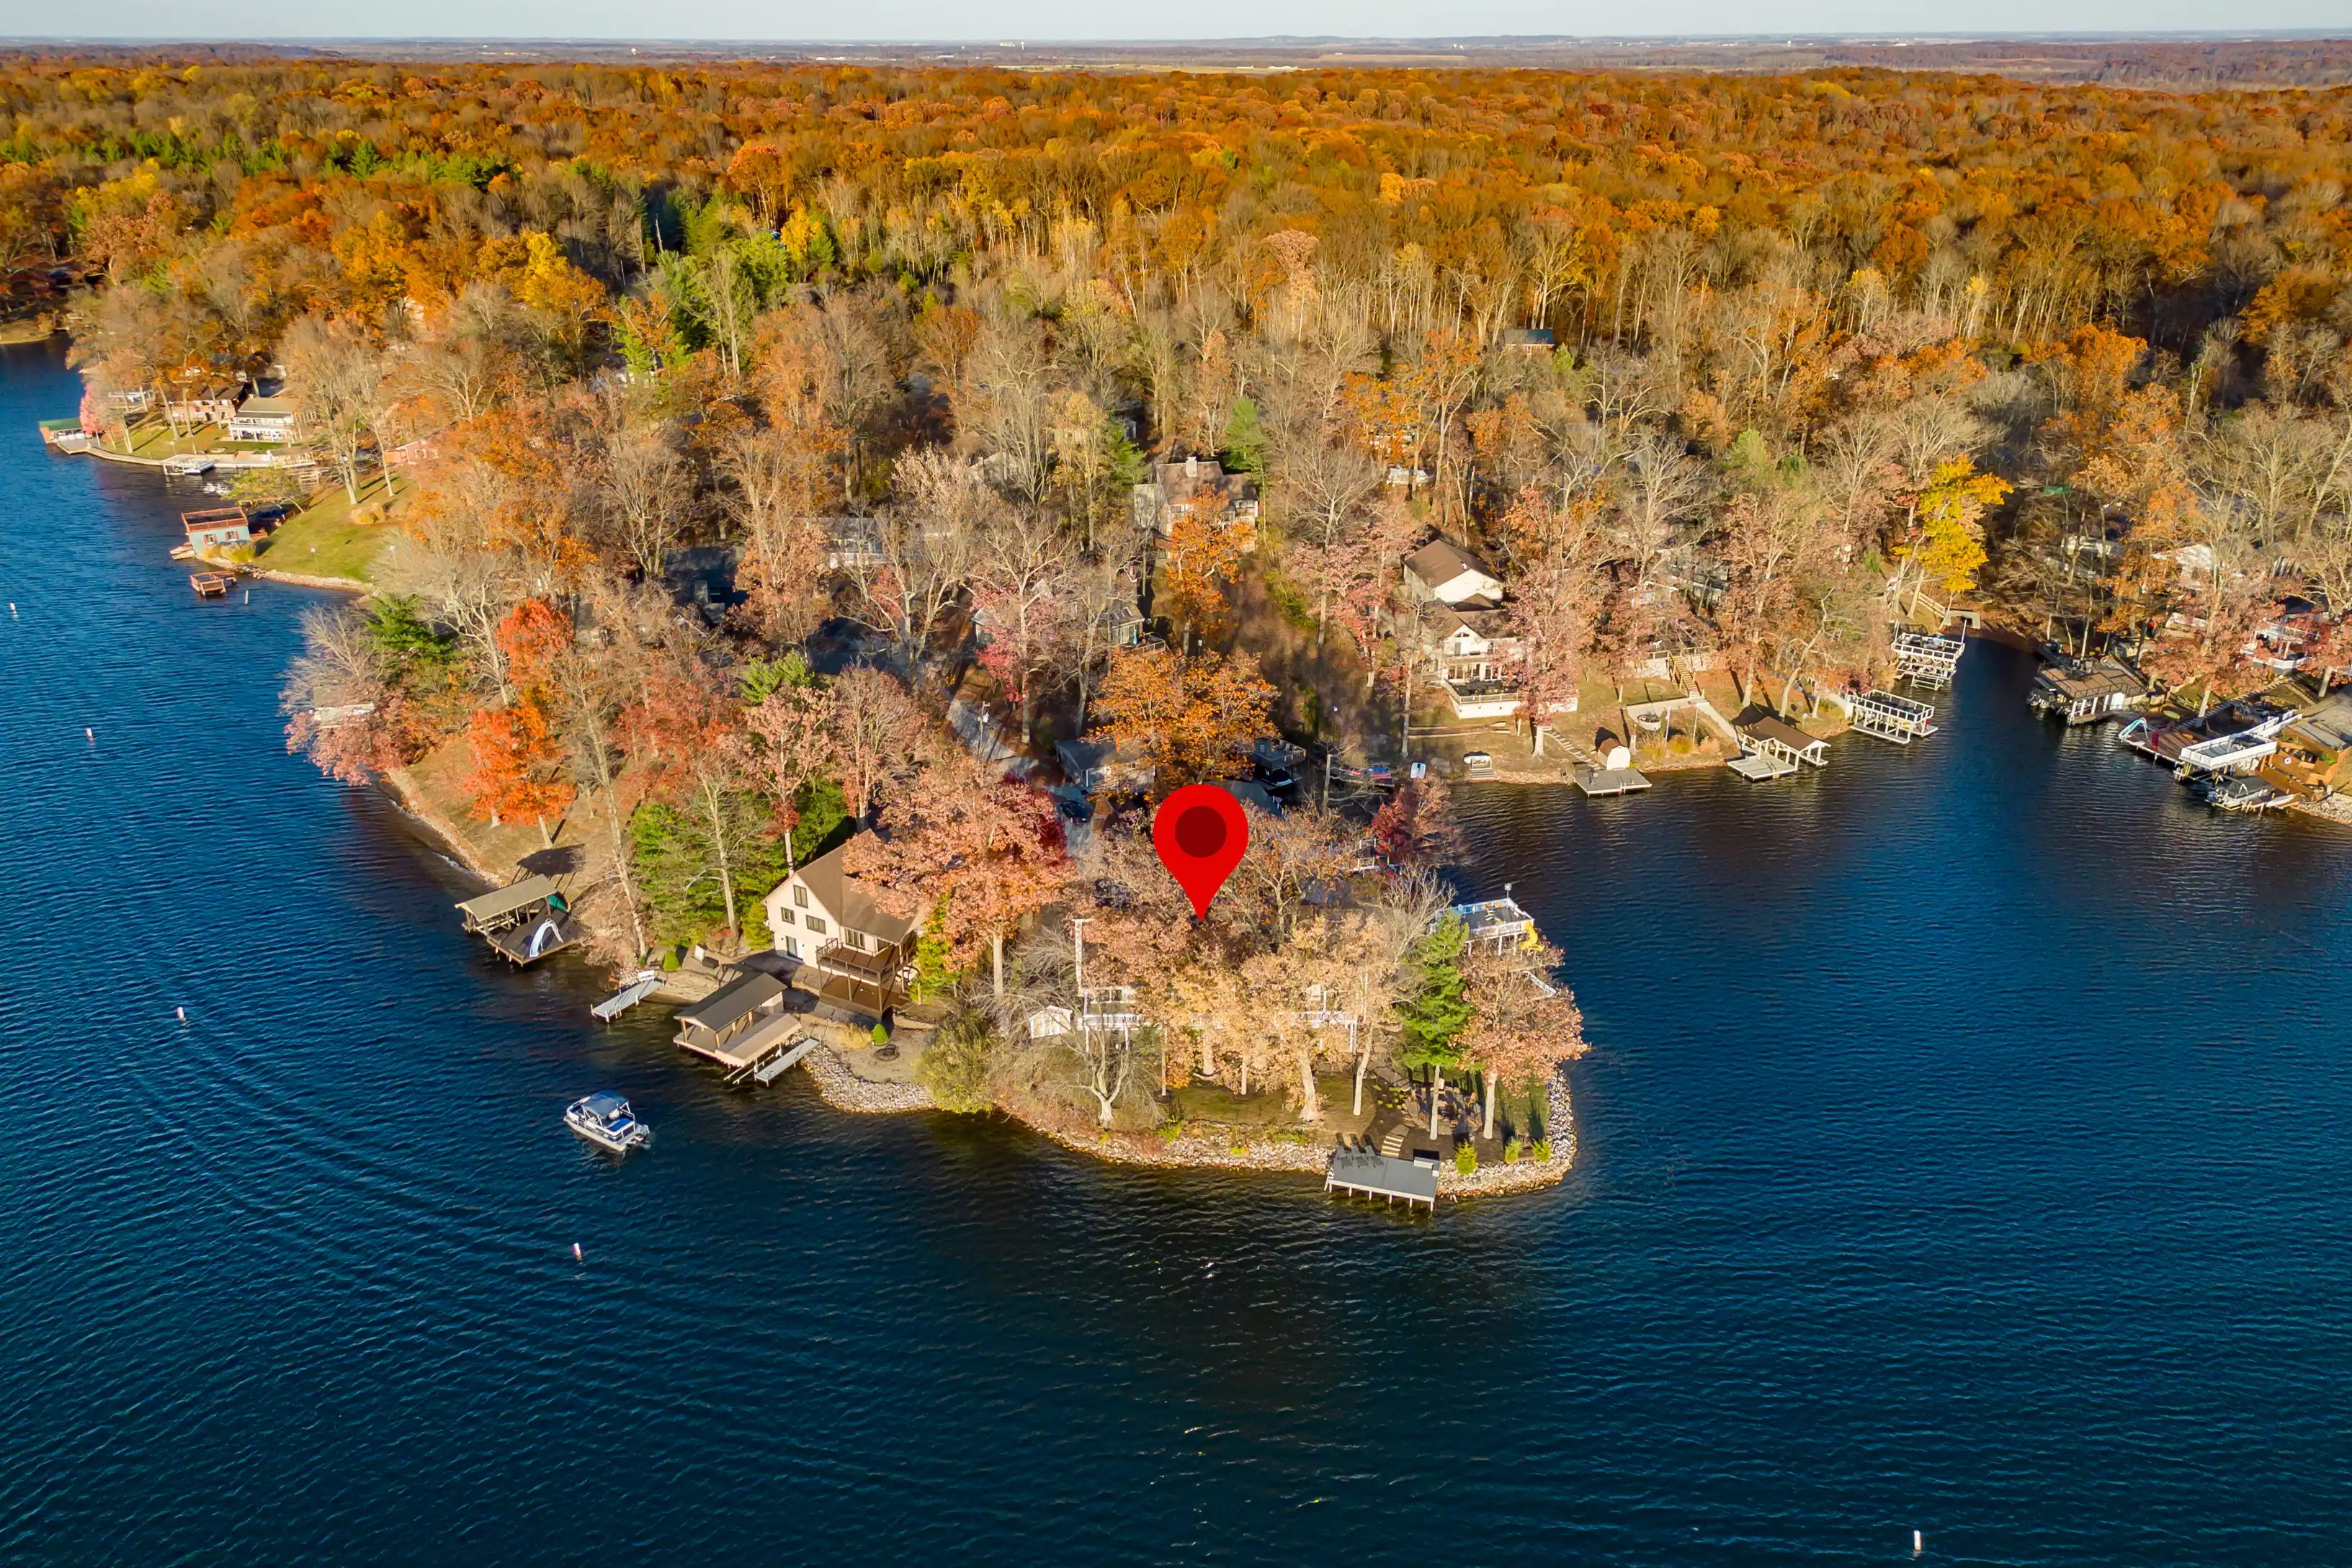 Aerial view of a lake with a red location marker over a peninsula with houses surrounded by autumn-colored trees.